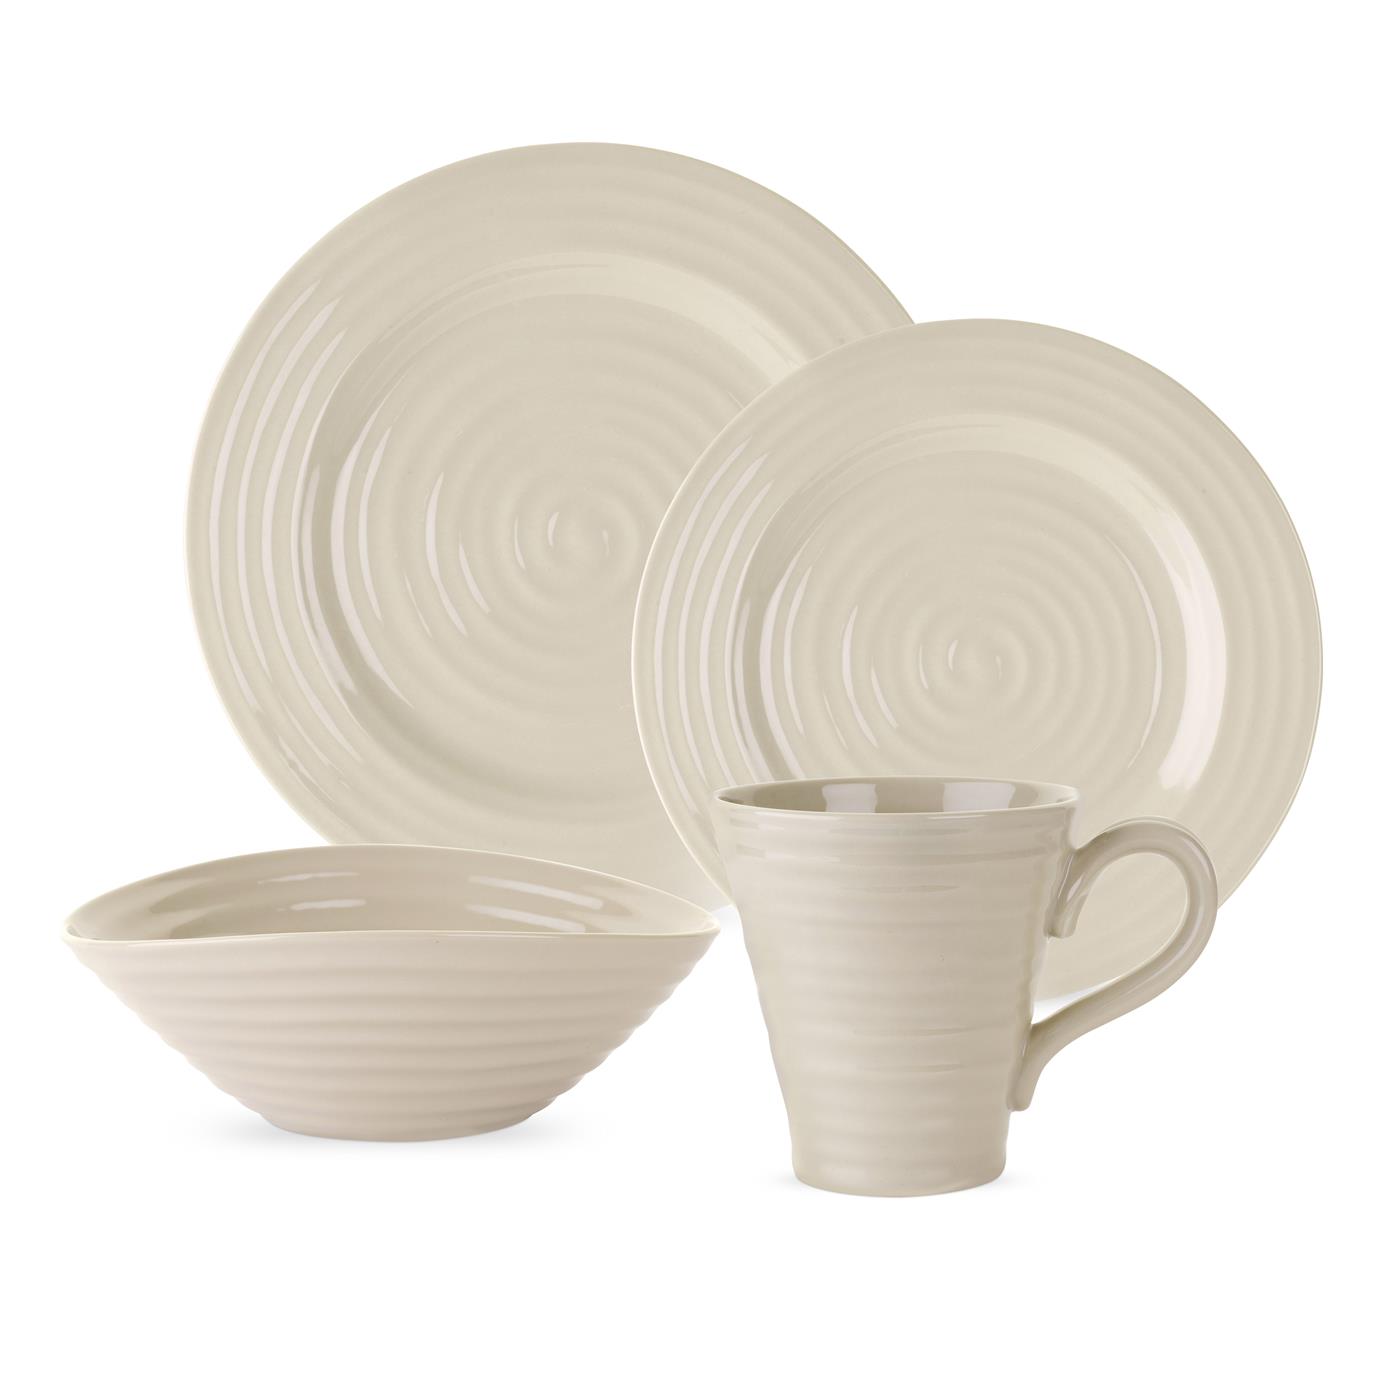 Sophie Conran Pebble 4 piece Place Setting image number null